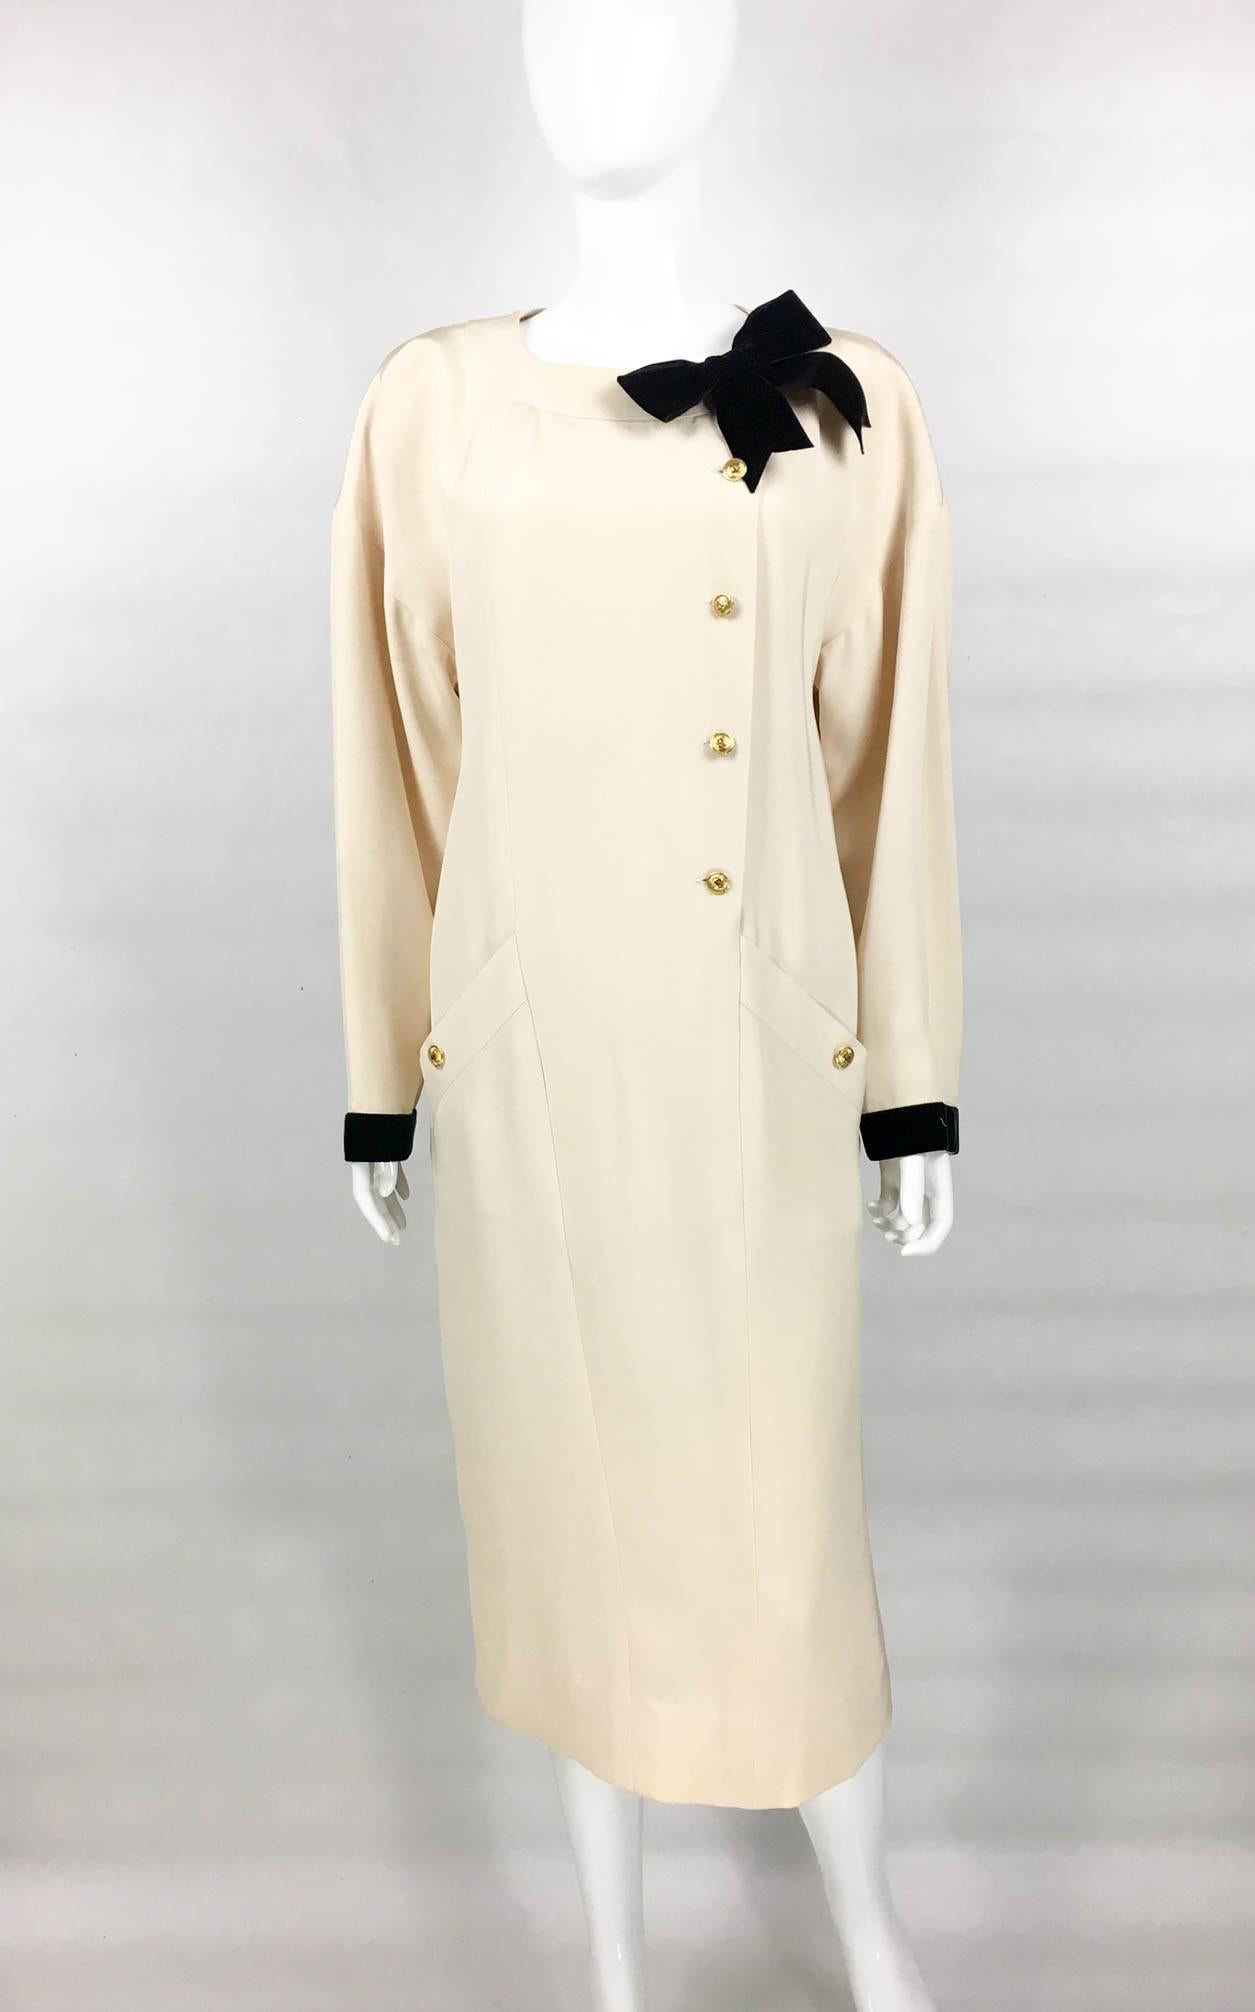 White Chanel Champagne Silk Dress With Black Velvet Cuffs and Bow - 1980s For Sale